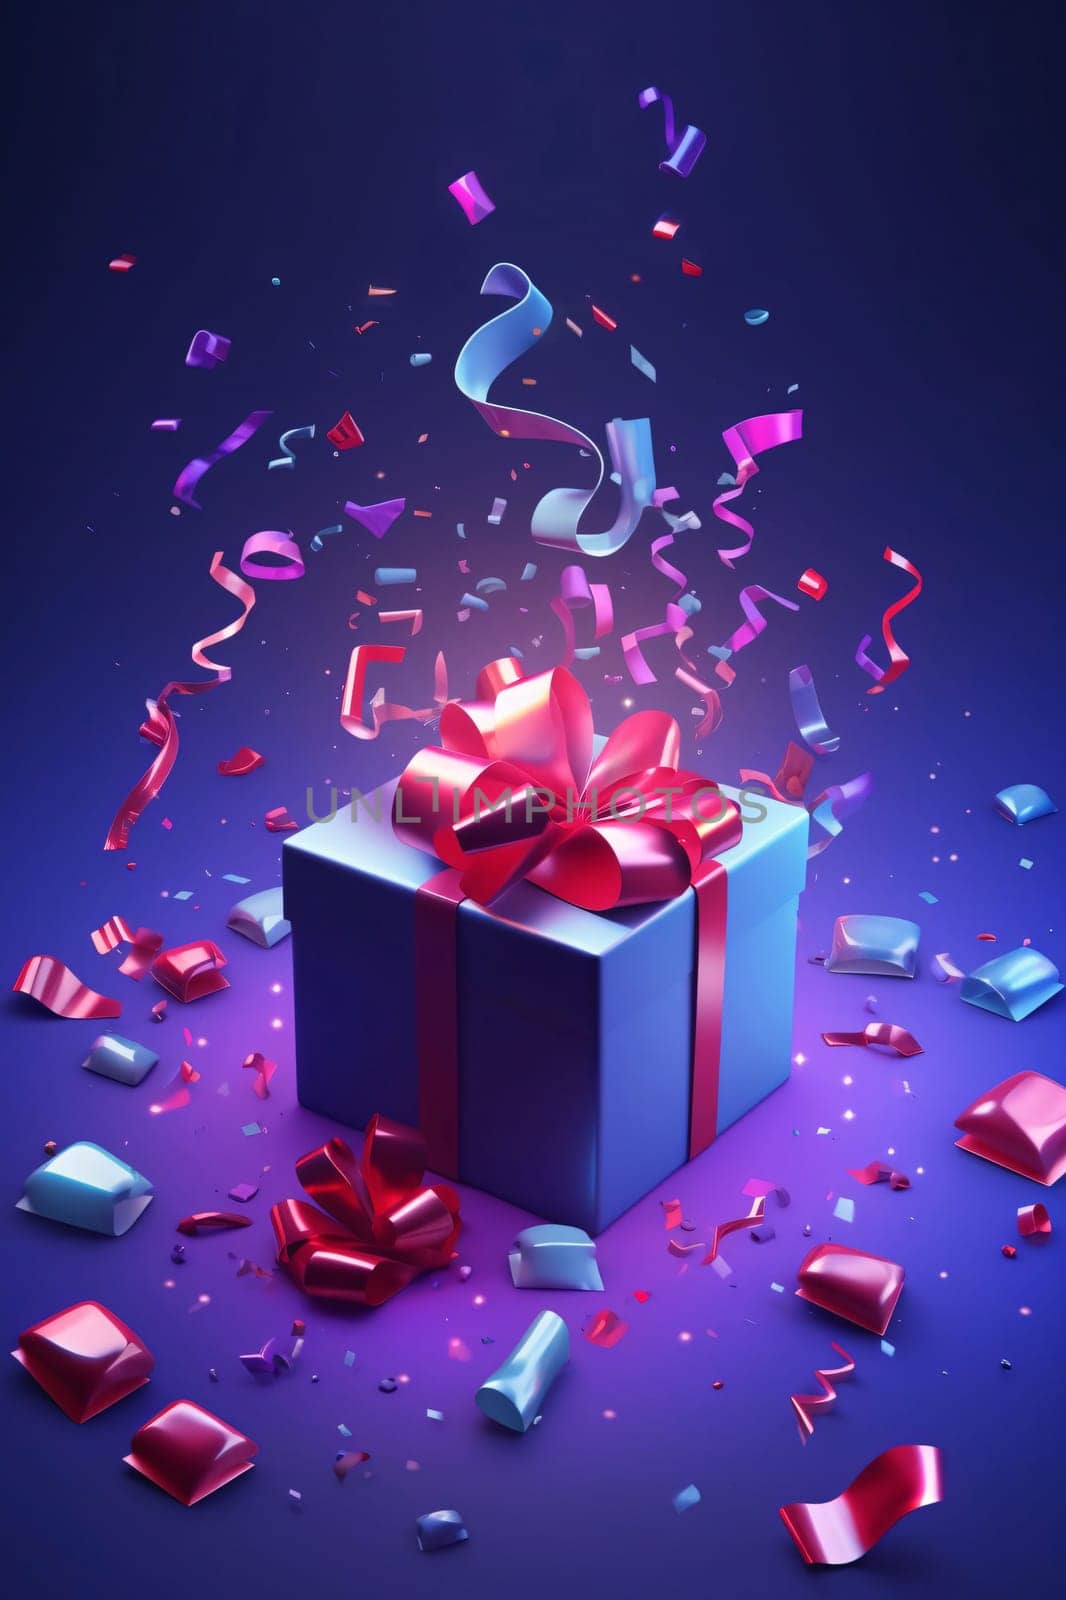 White box around streamers, red bows, dark background. Gifts as a day symbol of present and love. A time of falling in love and love.